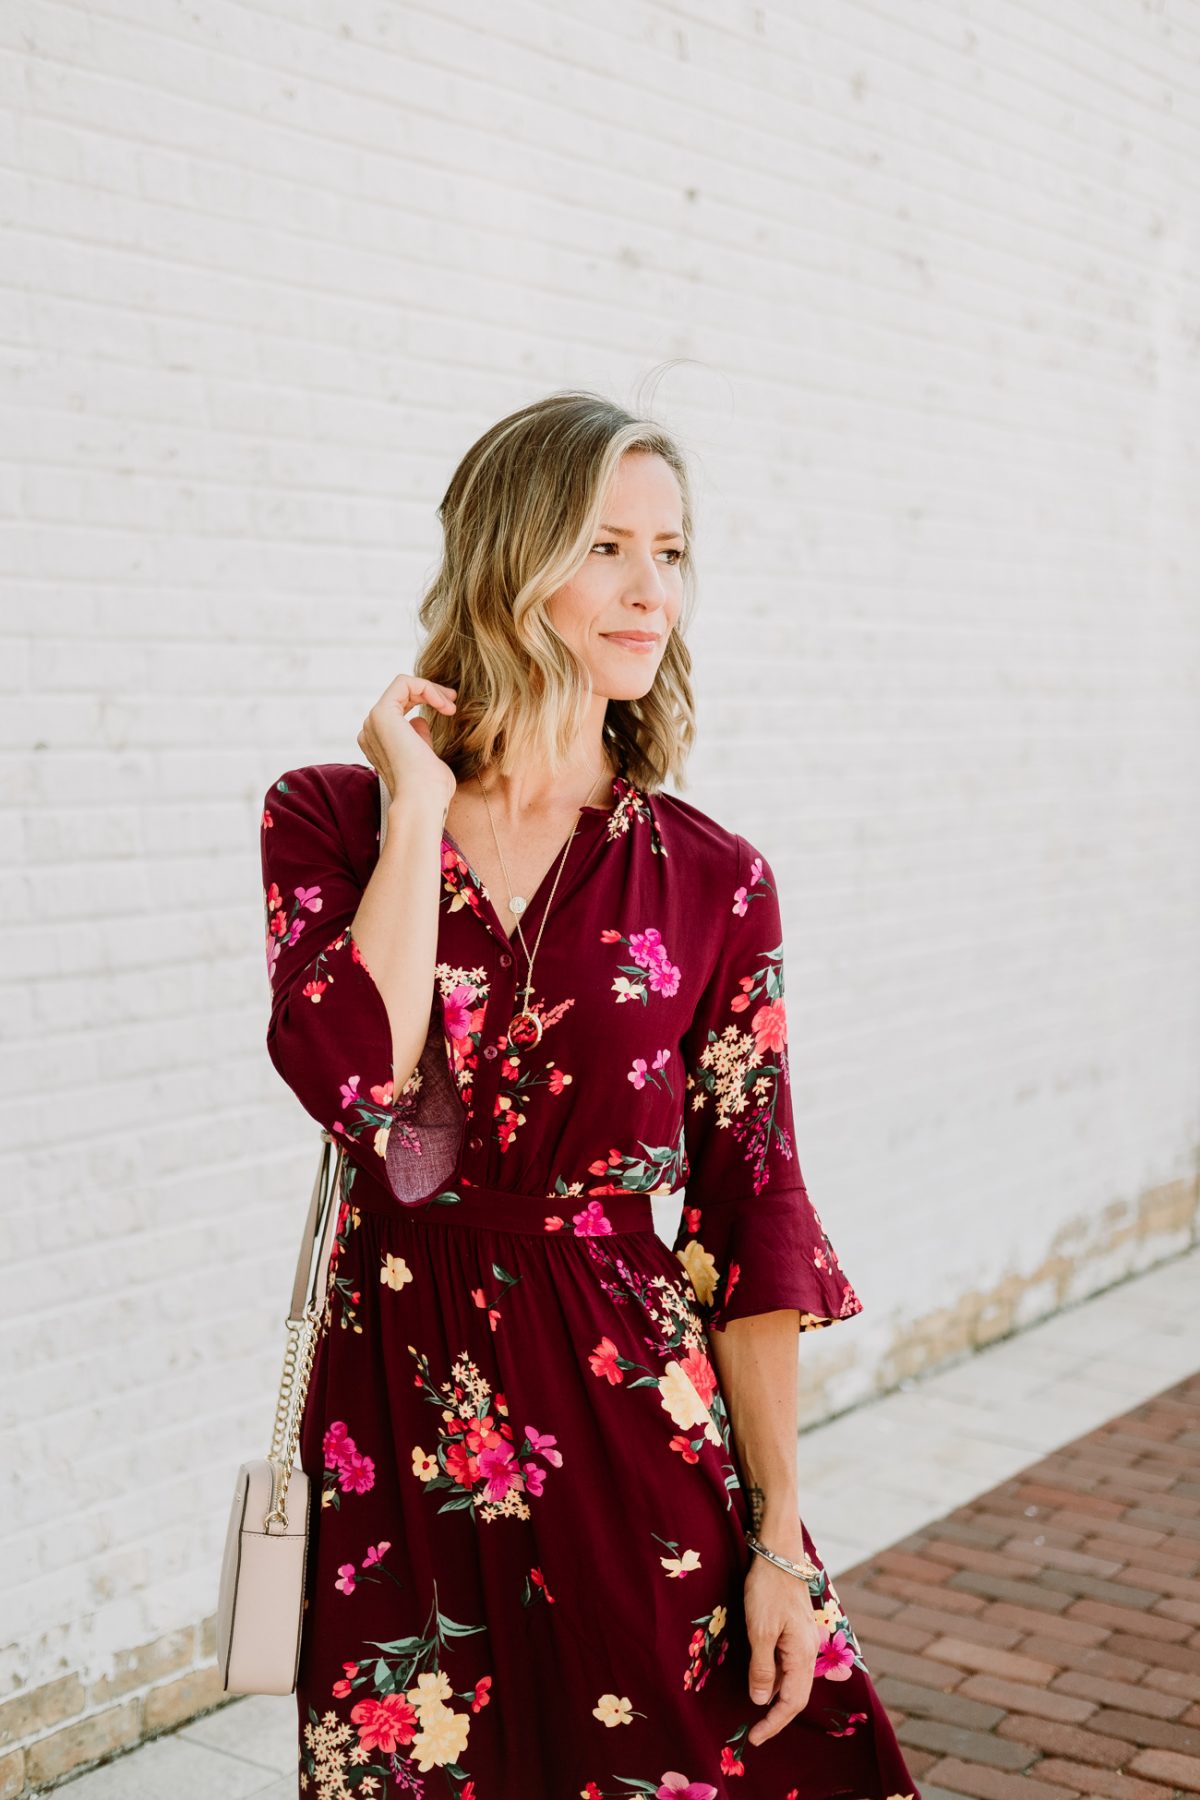 The $39 Fall Floral Dress That Gets Rave Reviews - My Kind of Sweet